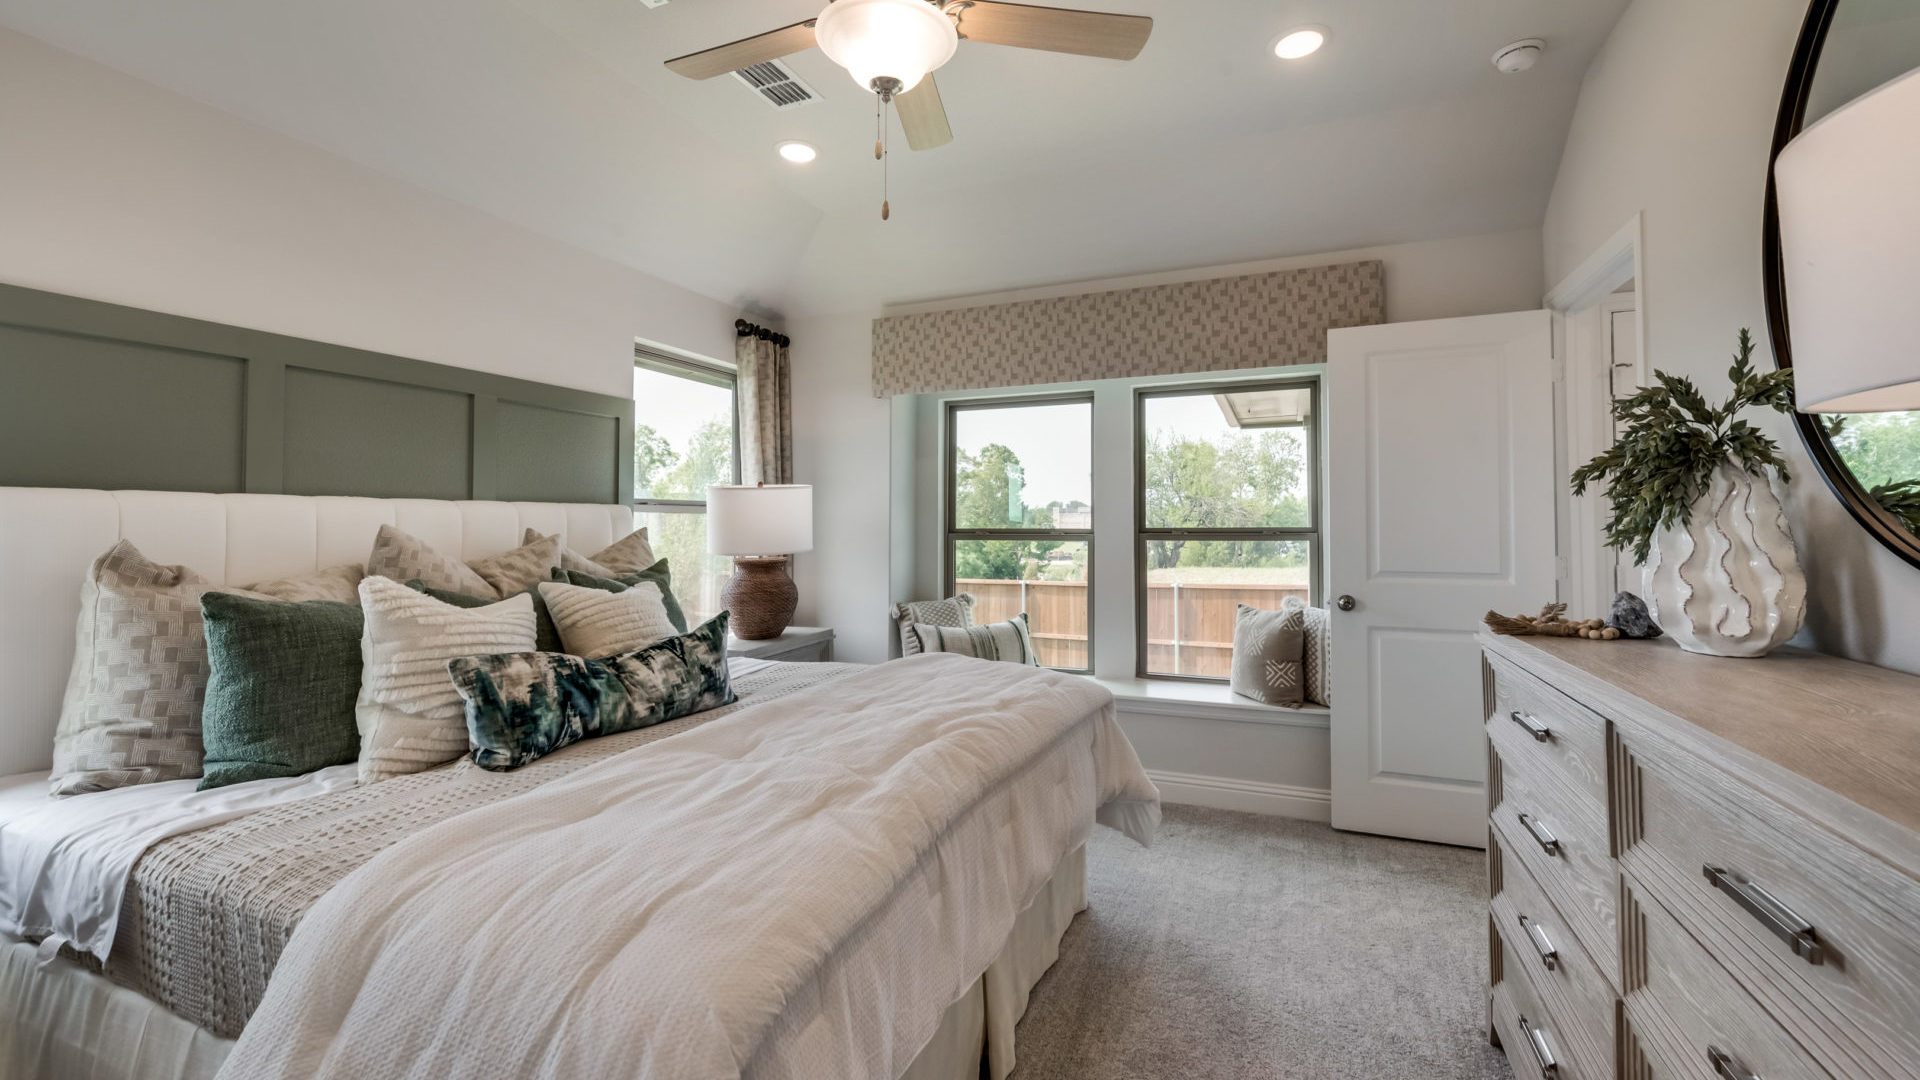 Town Park - New Model Now Open! new homes in Princeton, TX